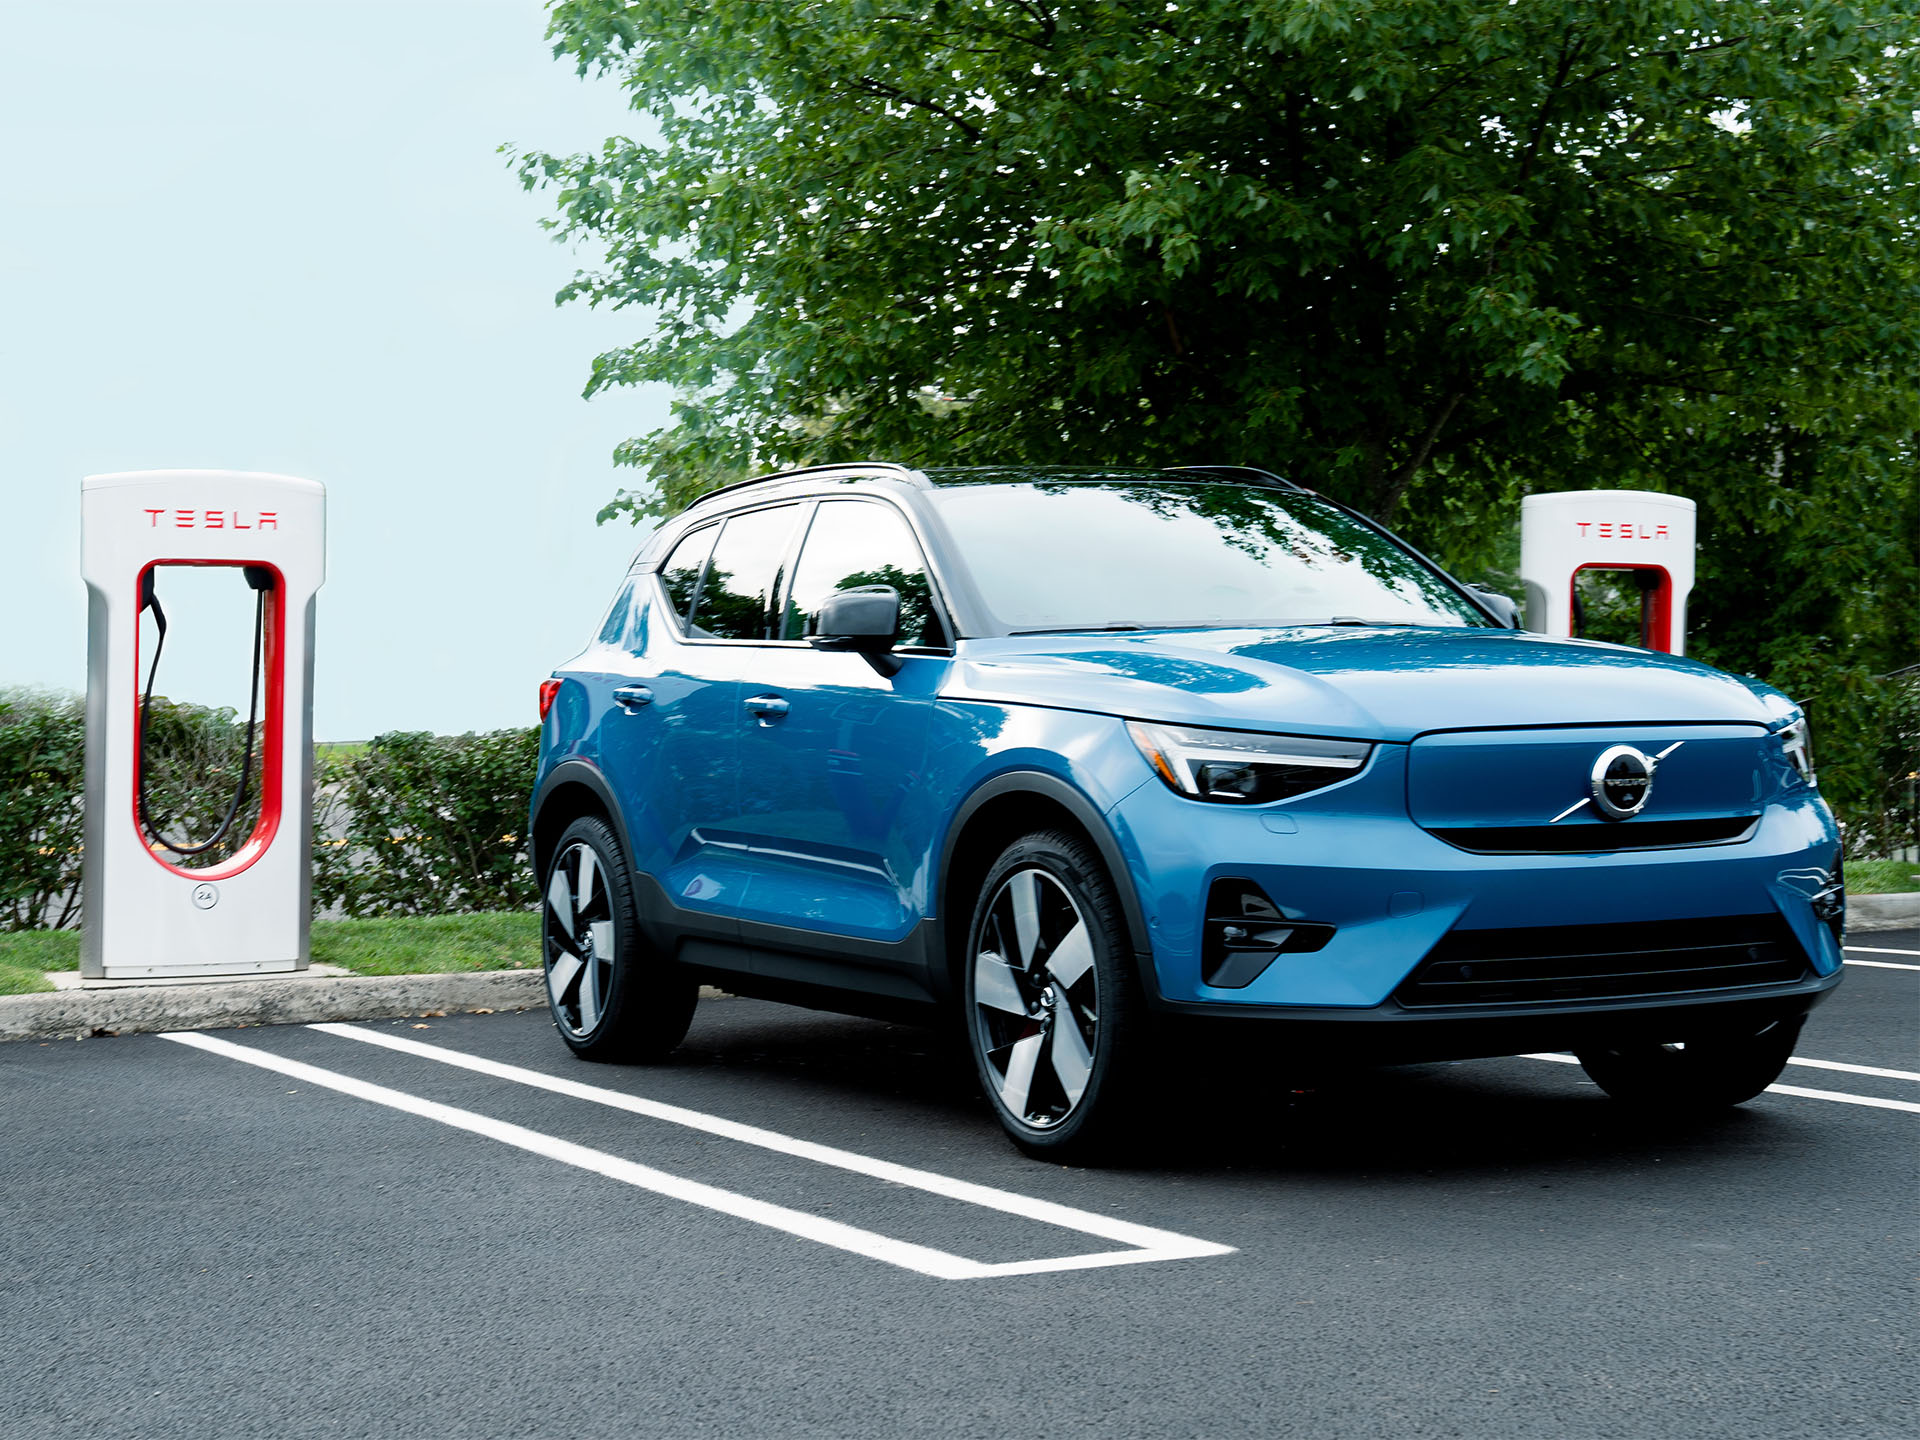 Fjord Blue Volvo XC40 Recharge fully electric parked at Tesla Supercharger - North American Charging Standard (NACS)